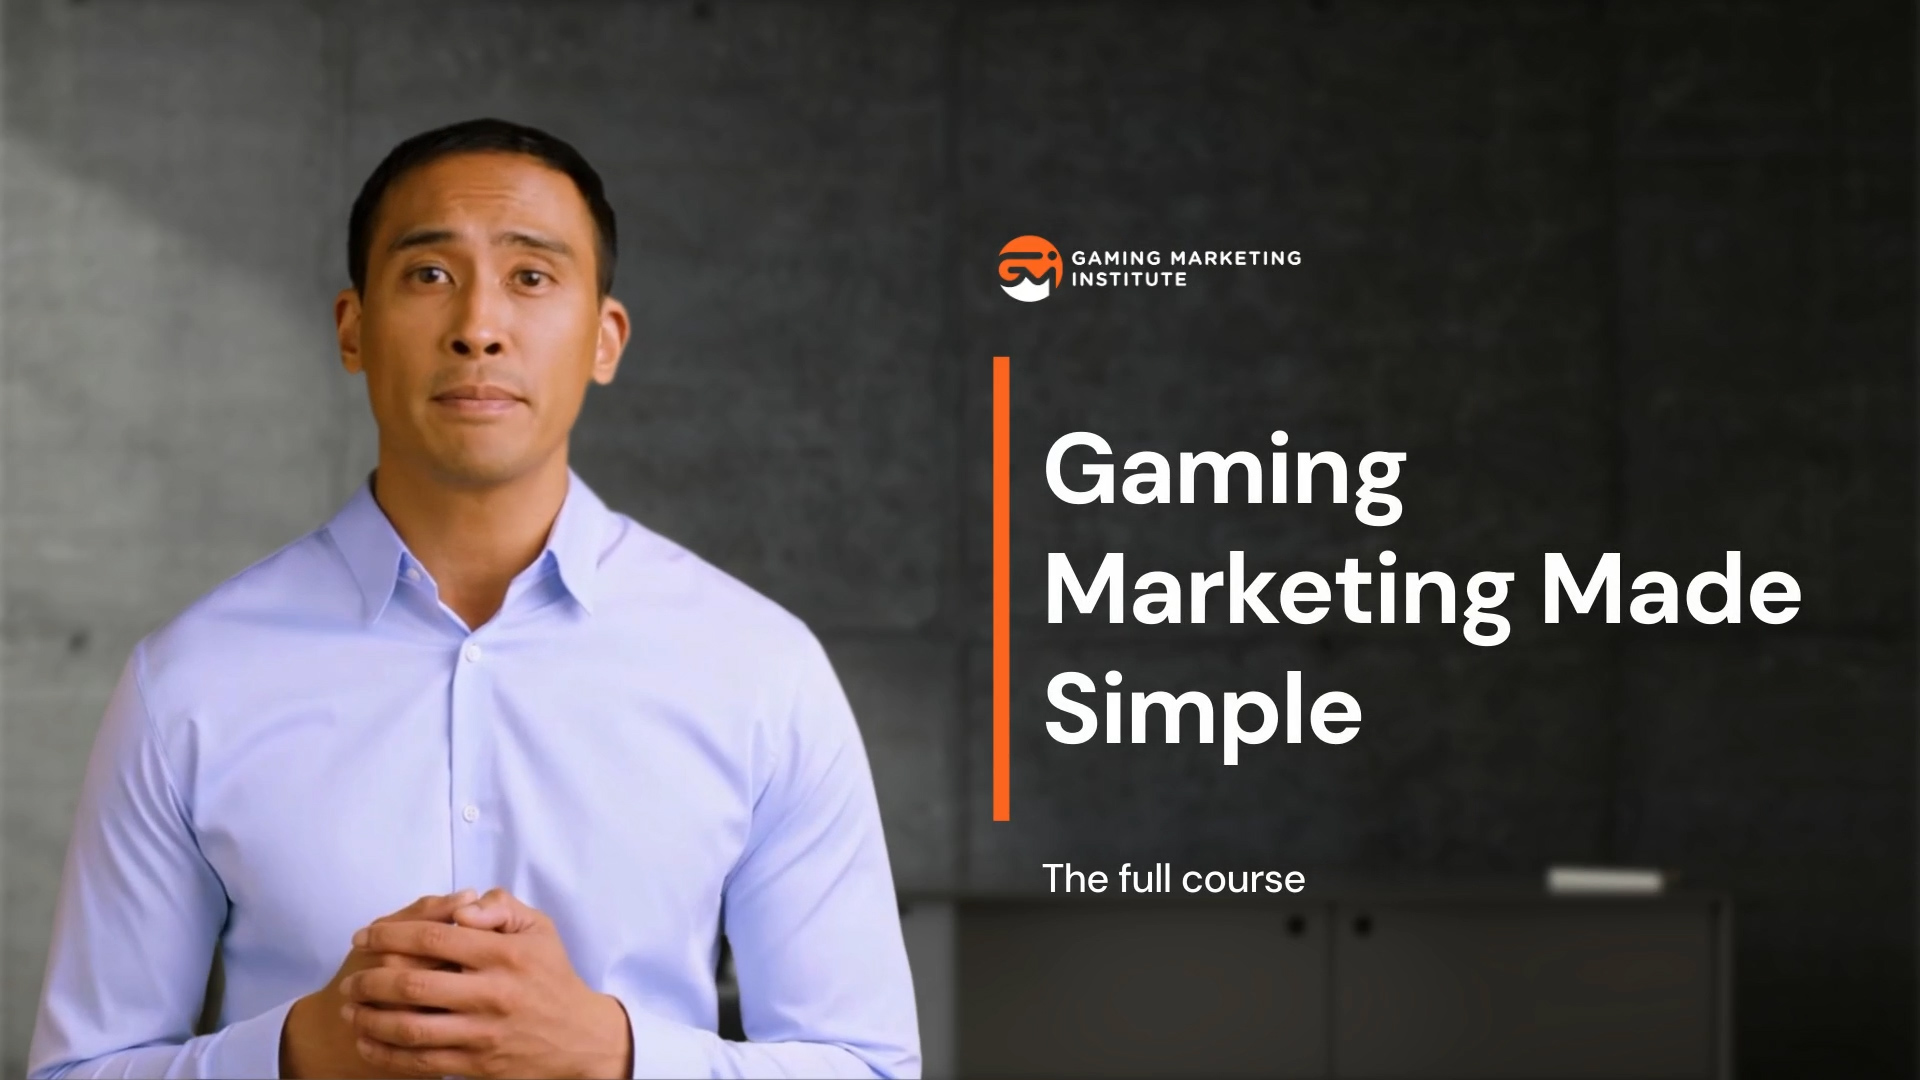 Gaming Marketing Simplificat - Curs complet - Esports Group